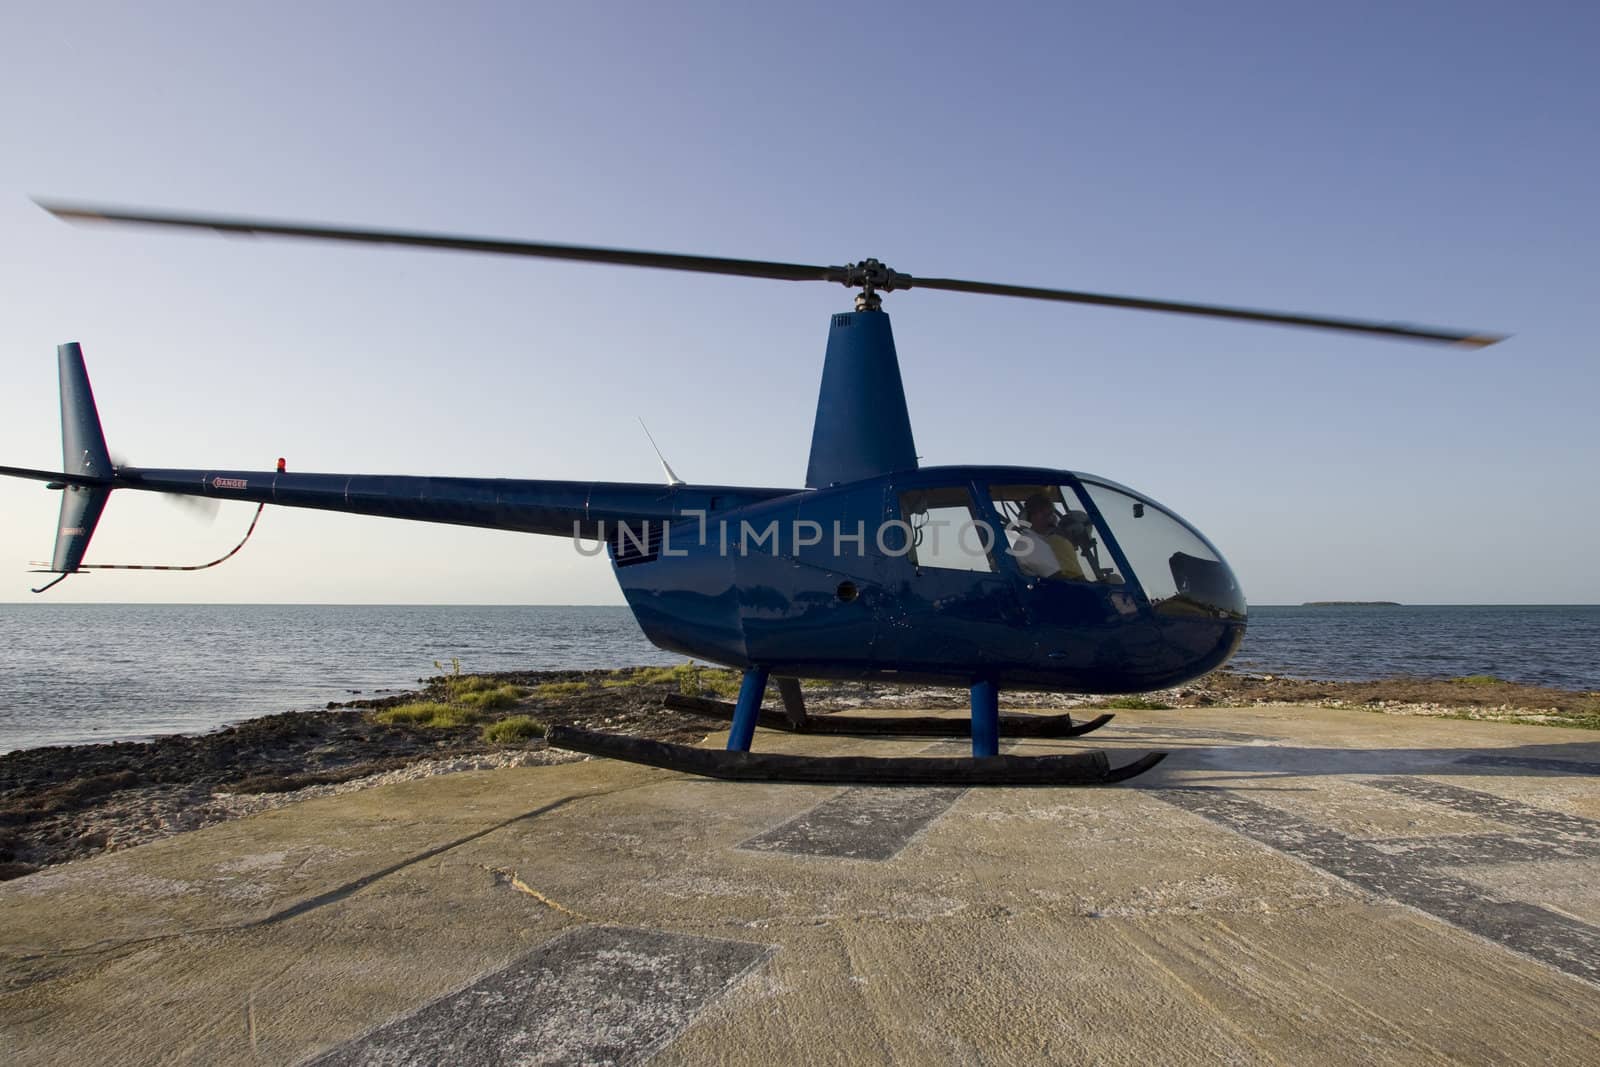 Helicopter Robinson 44 landed on an helipad in front of the ocean